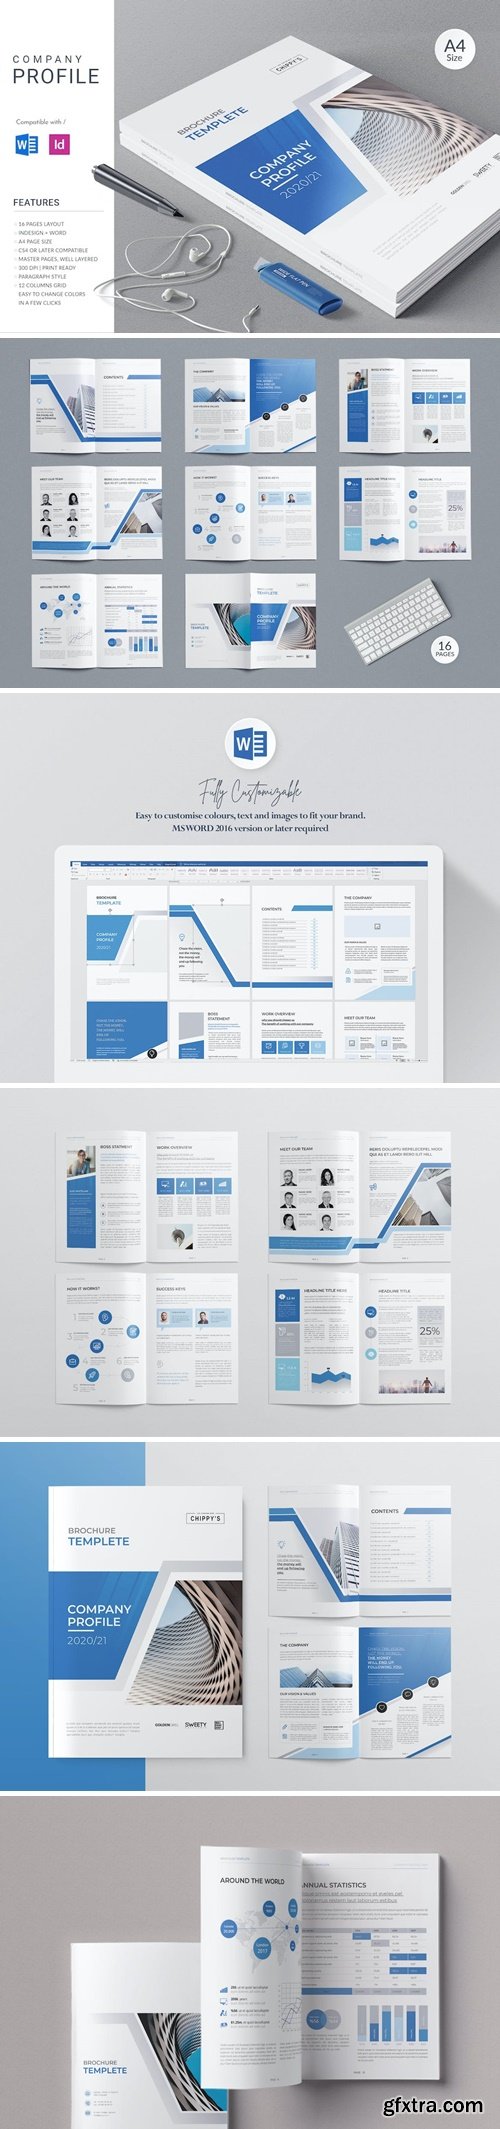 Brochure Template | 16 Pages | Word | InDesign AXVRMC3